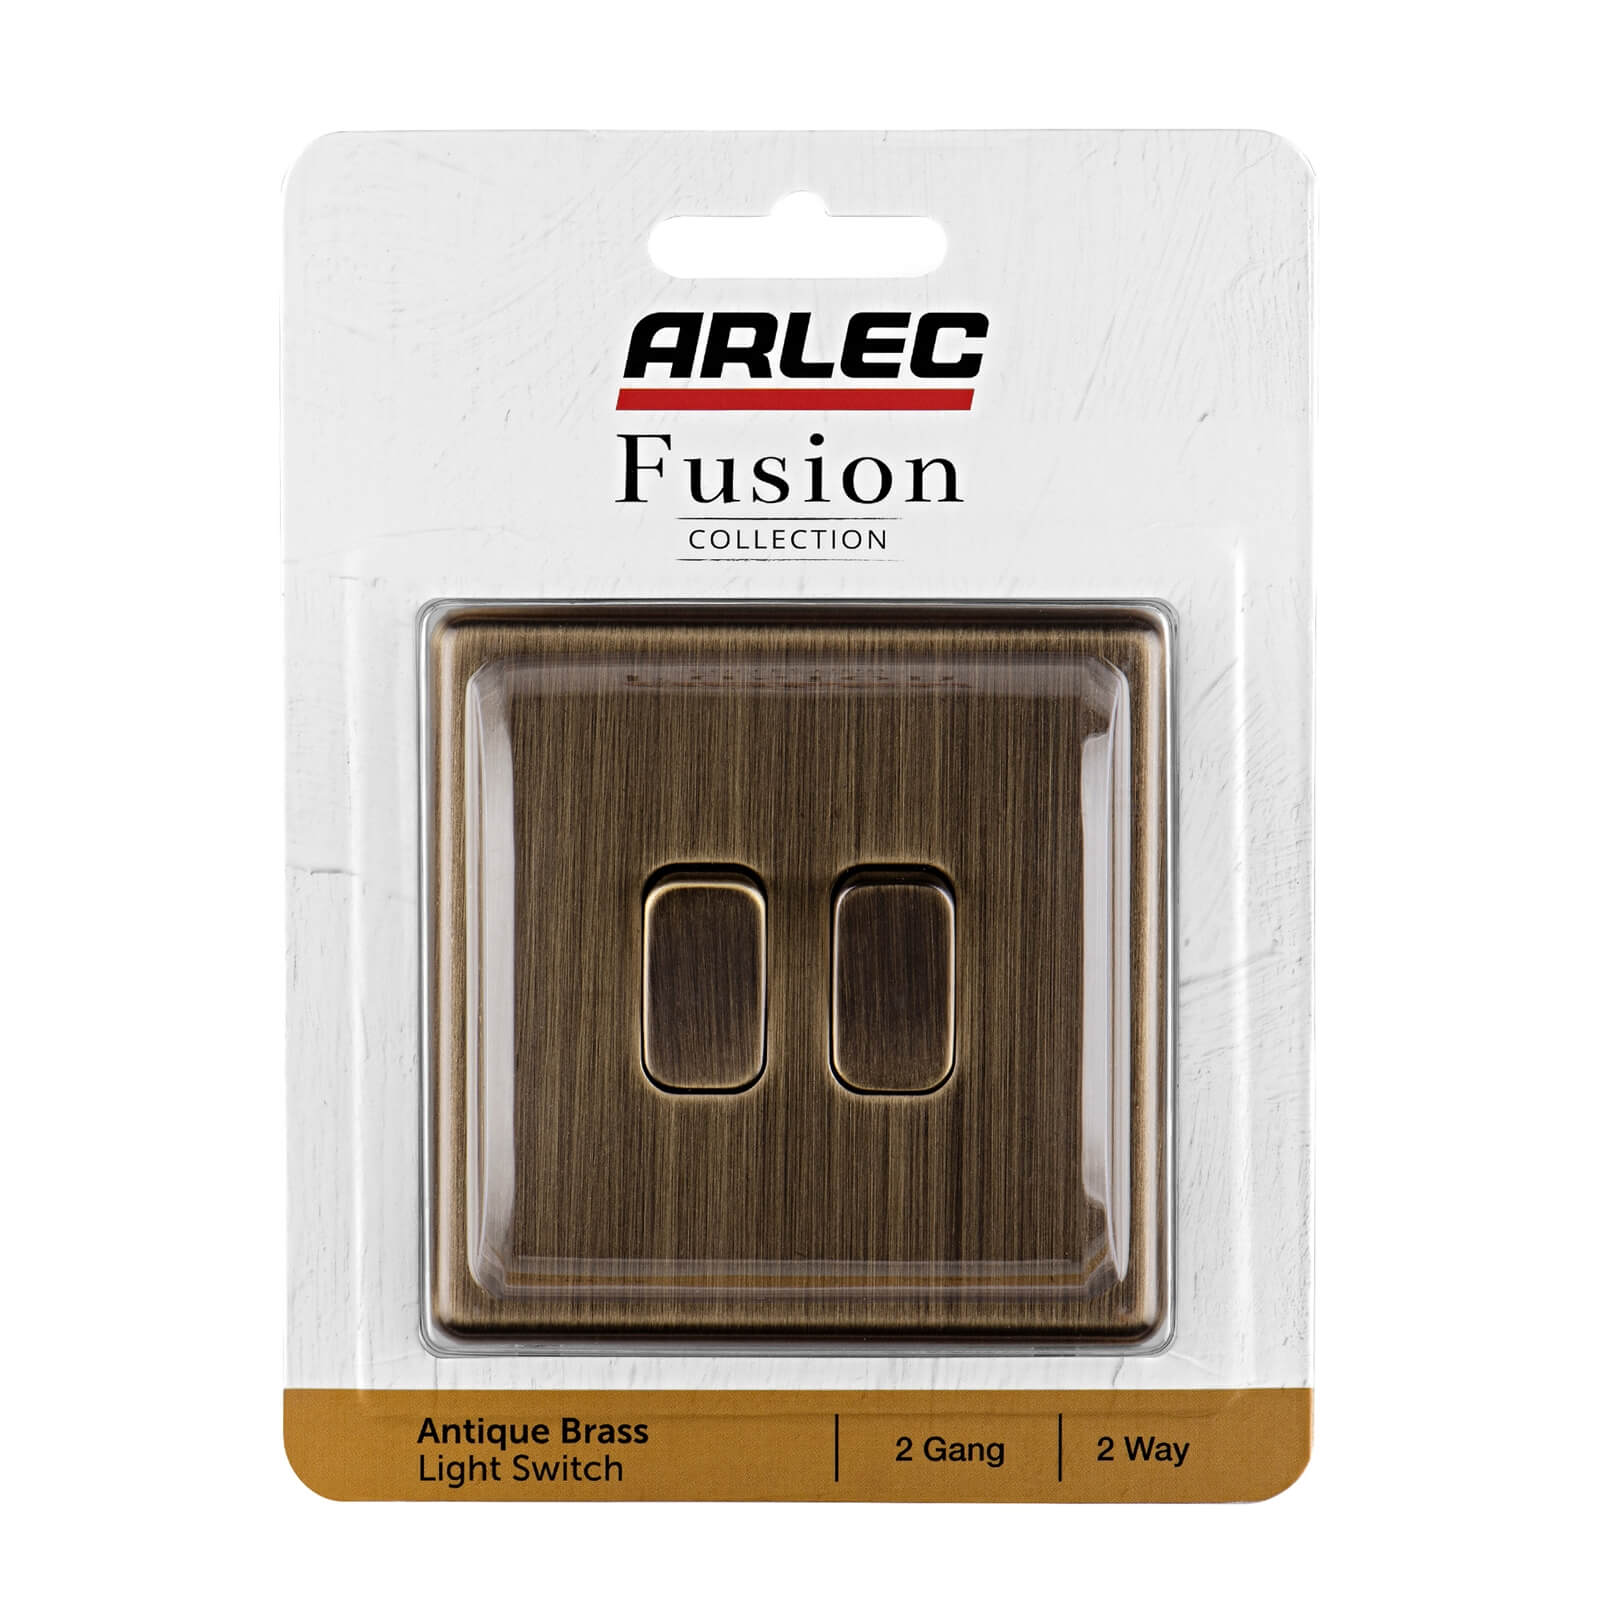 Arlec Fusion 10A 2Gang 2Way Antique Brass Double light switch